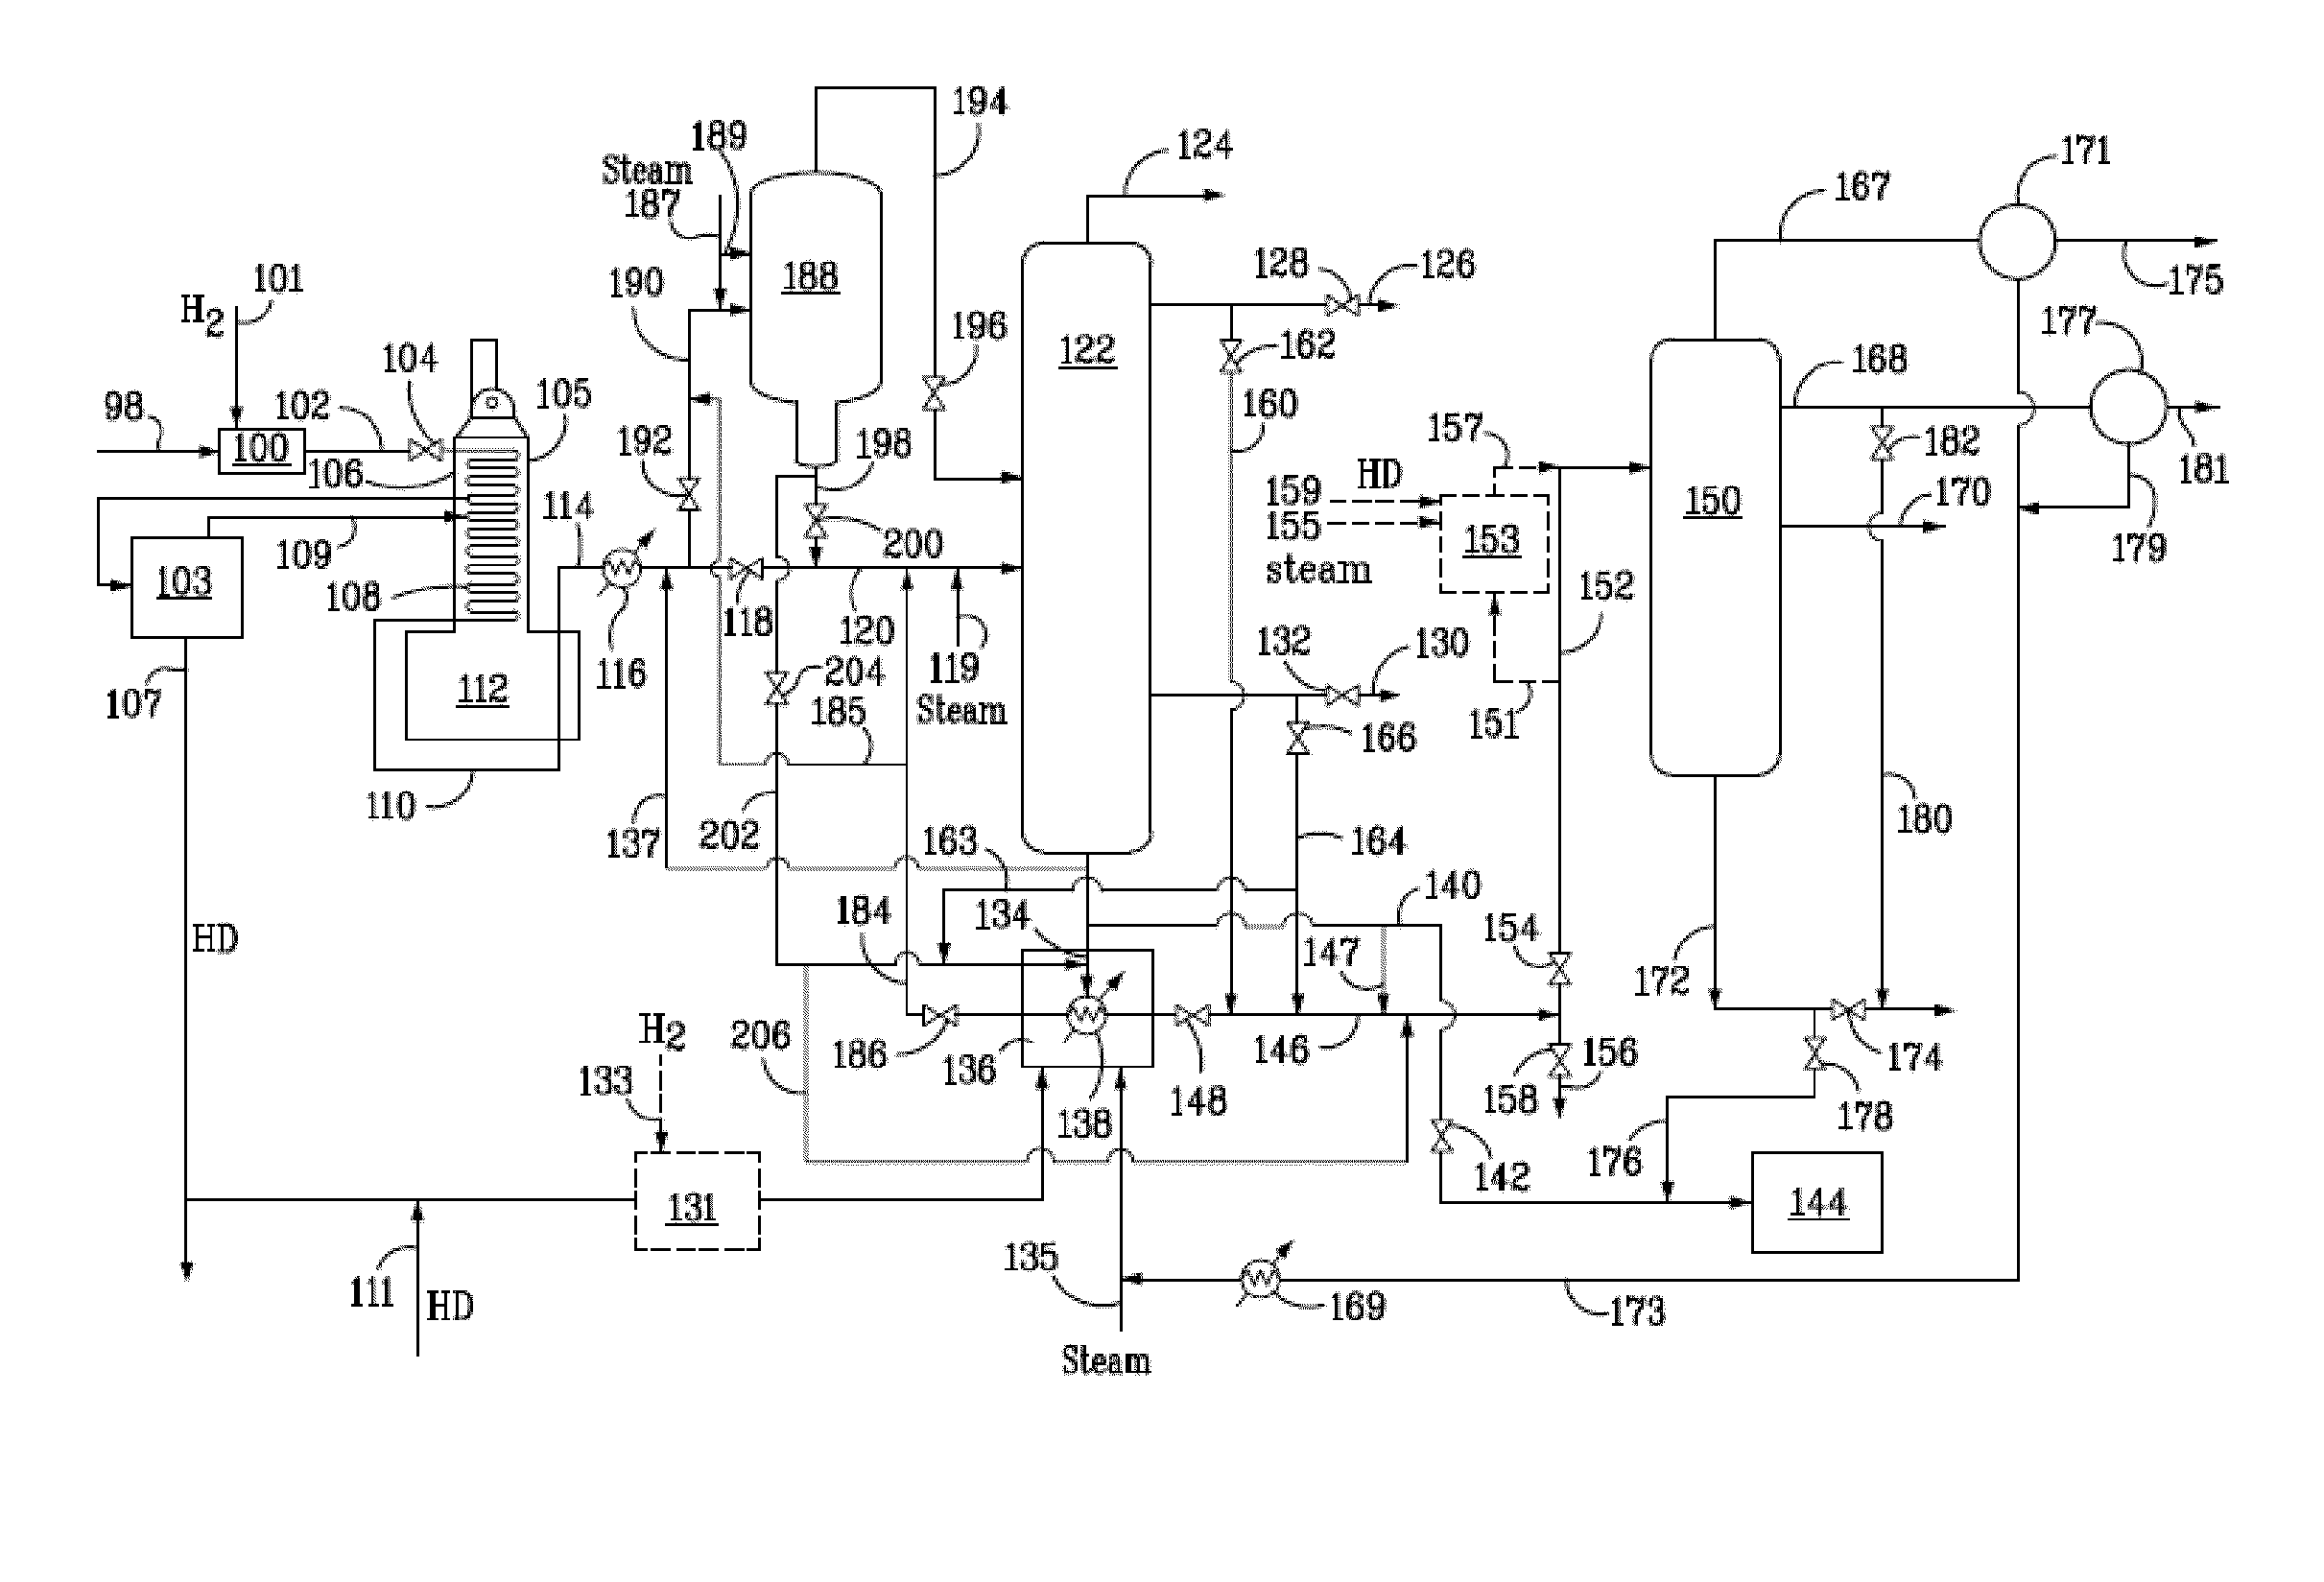 Process and Apparatus for Upgrading Steam Cracker Tar Using Hydrogen Donor Compounds